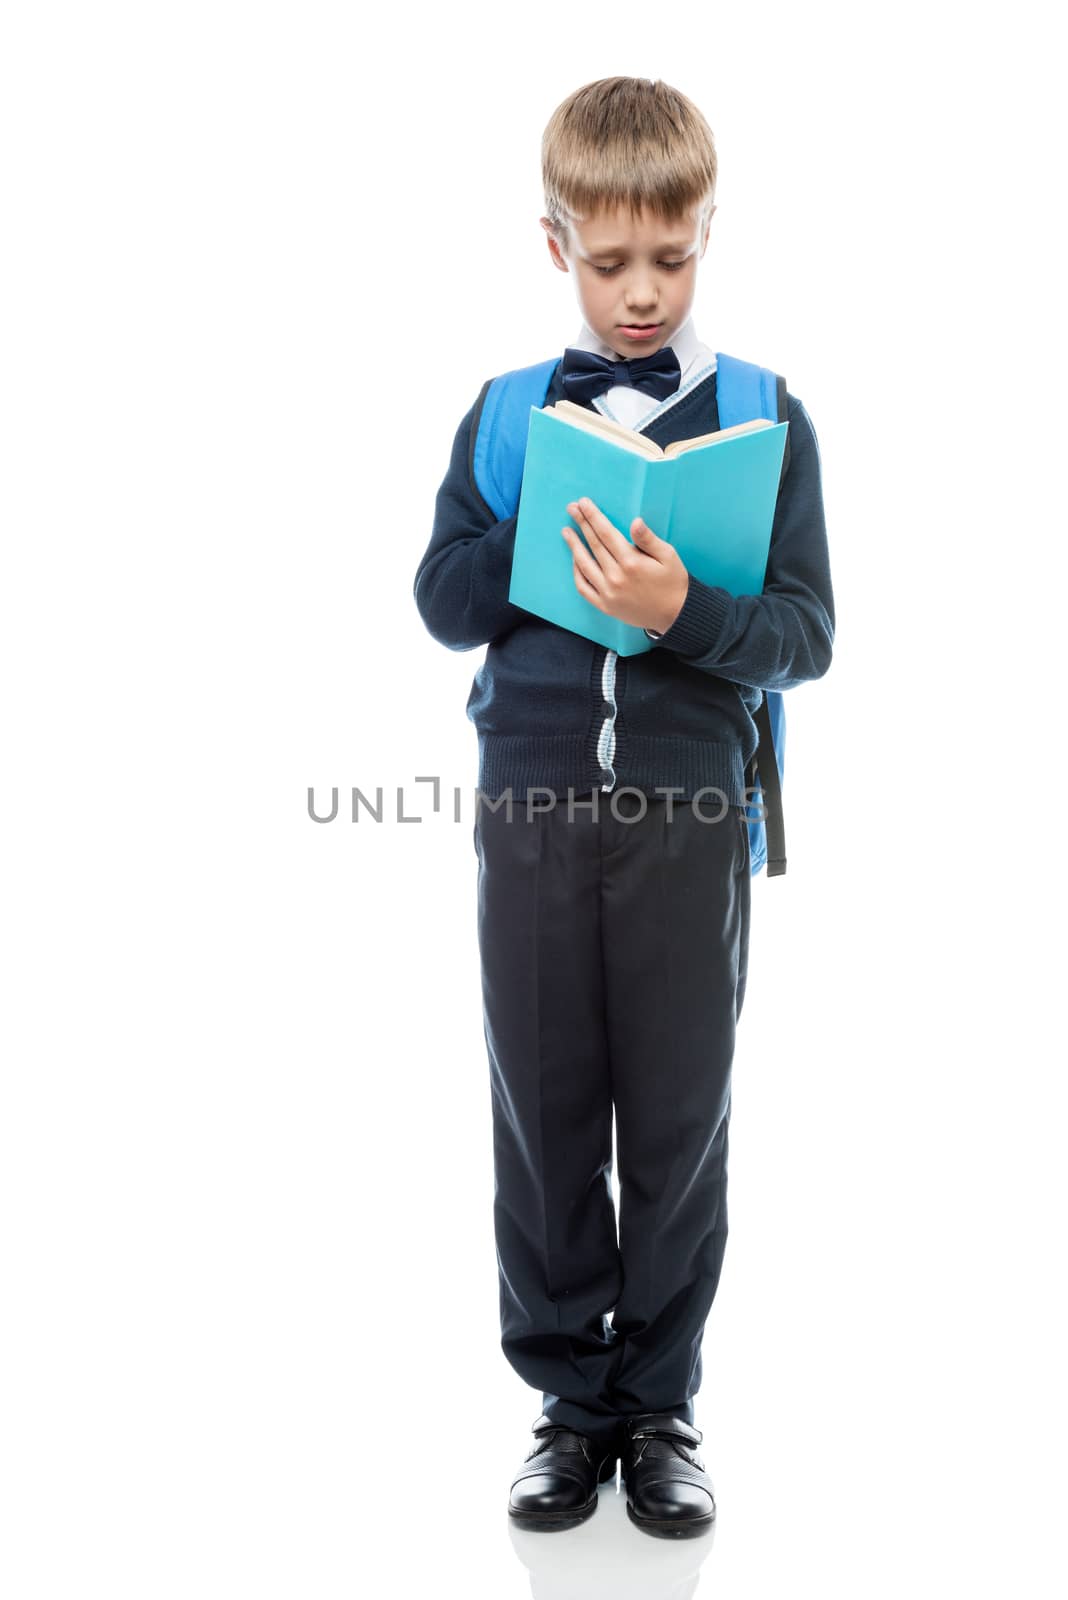 schoolboy with textbook and backpack on a white background in fu by kosmsos111